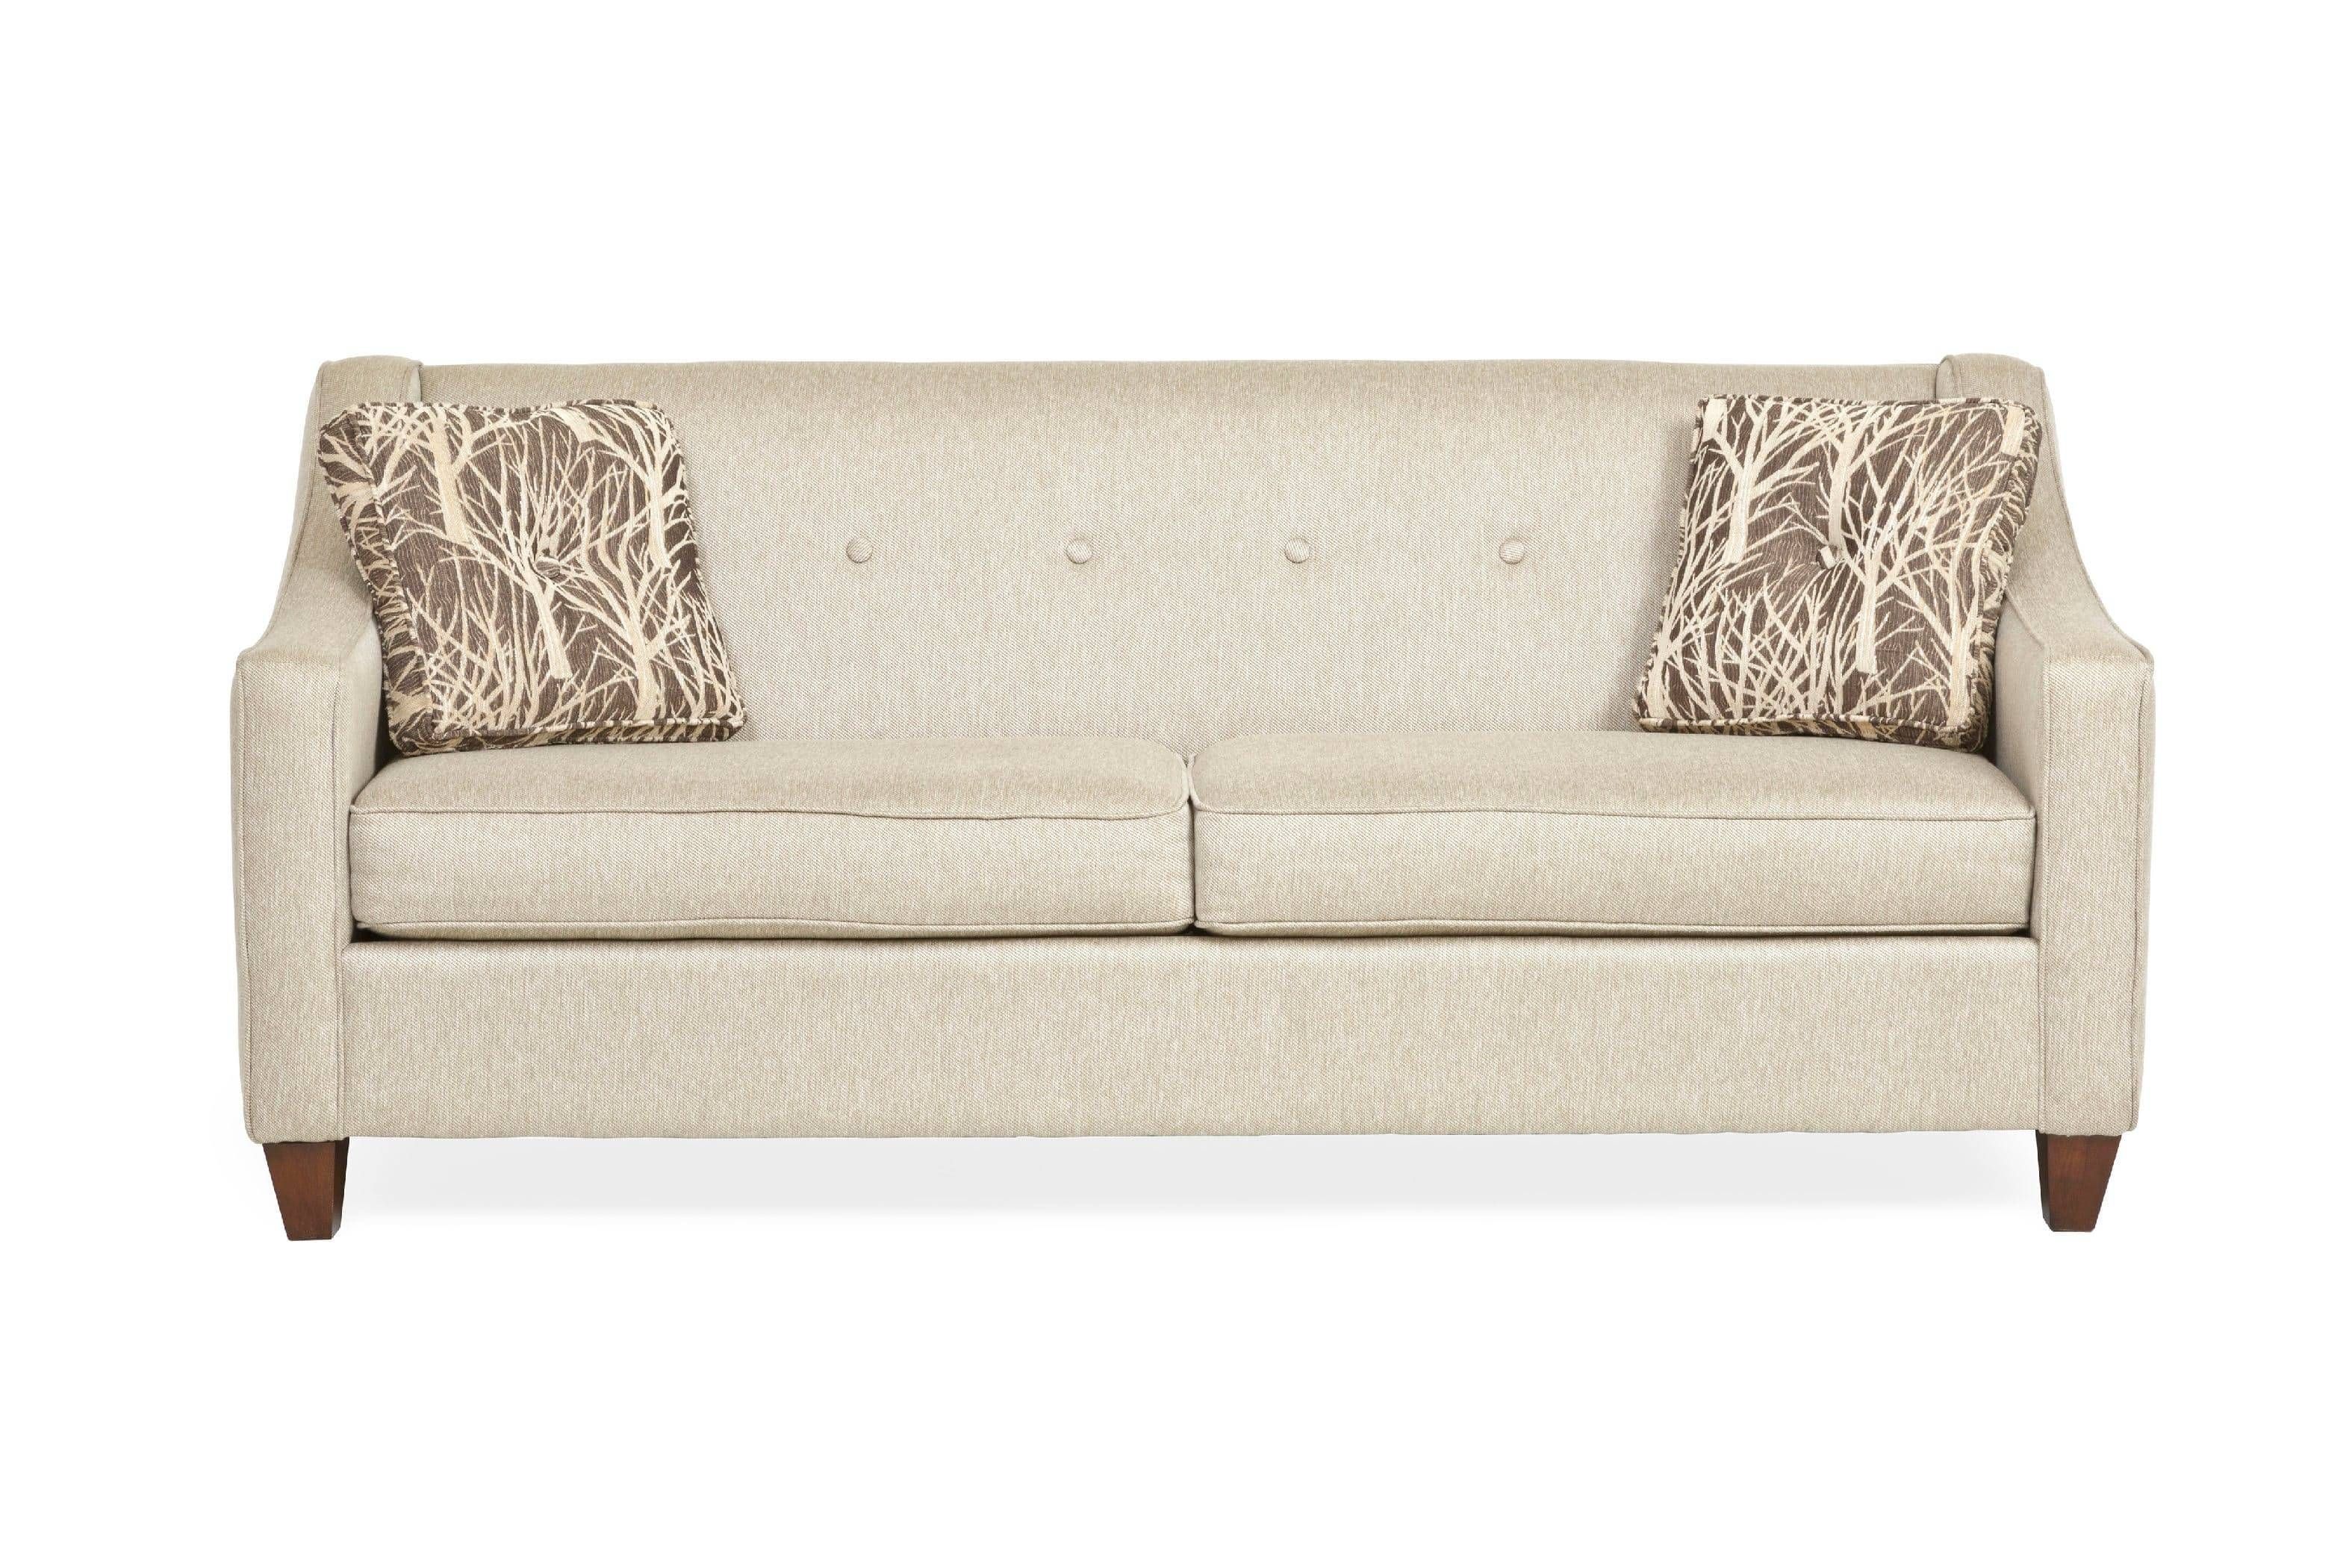 pier one sofa bed